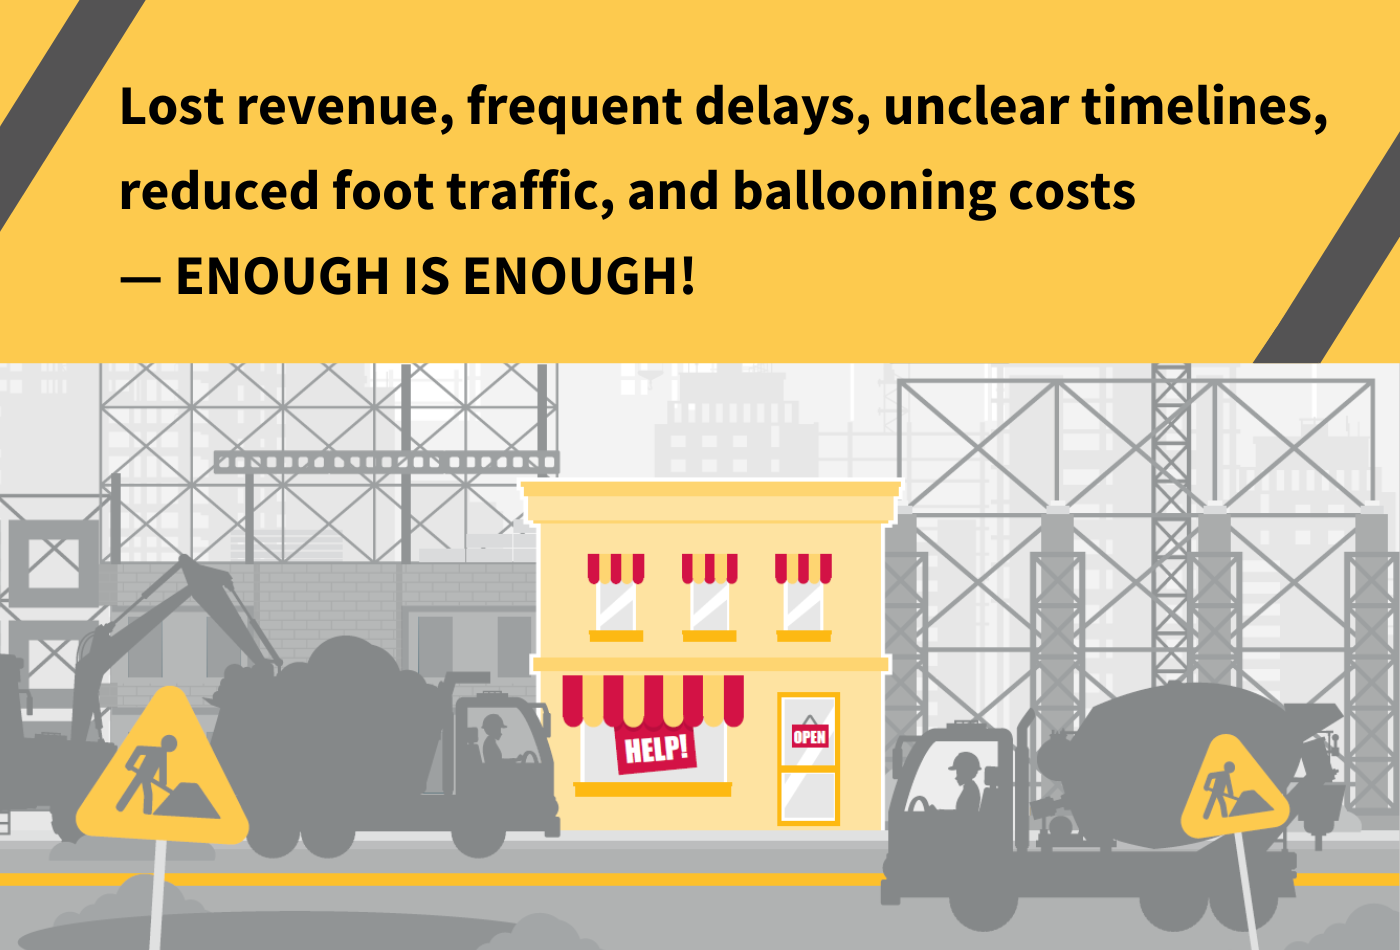 Lost revenue, frequent delays, unclear timelines, reduced foot traffic, and ballooning costs — ENOUGH IS ENOUGH!